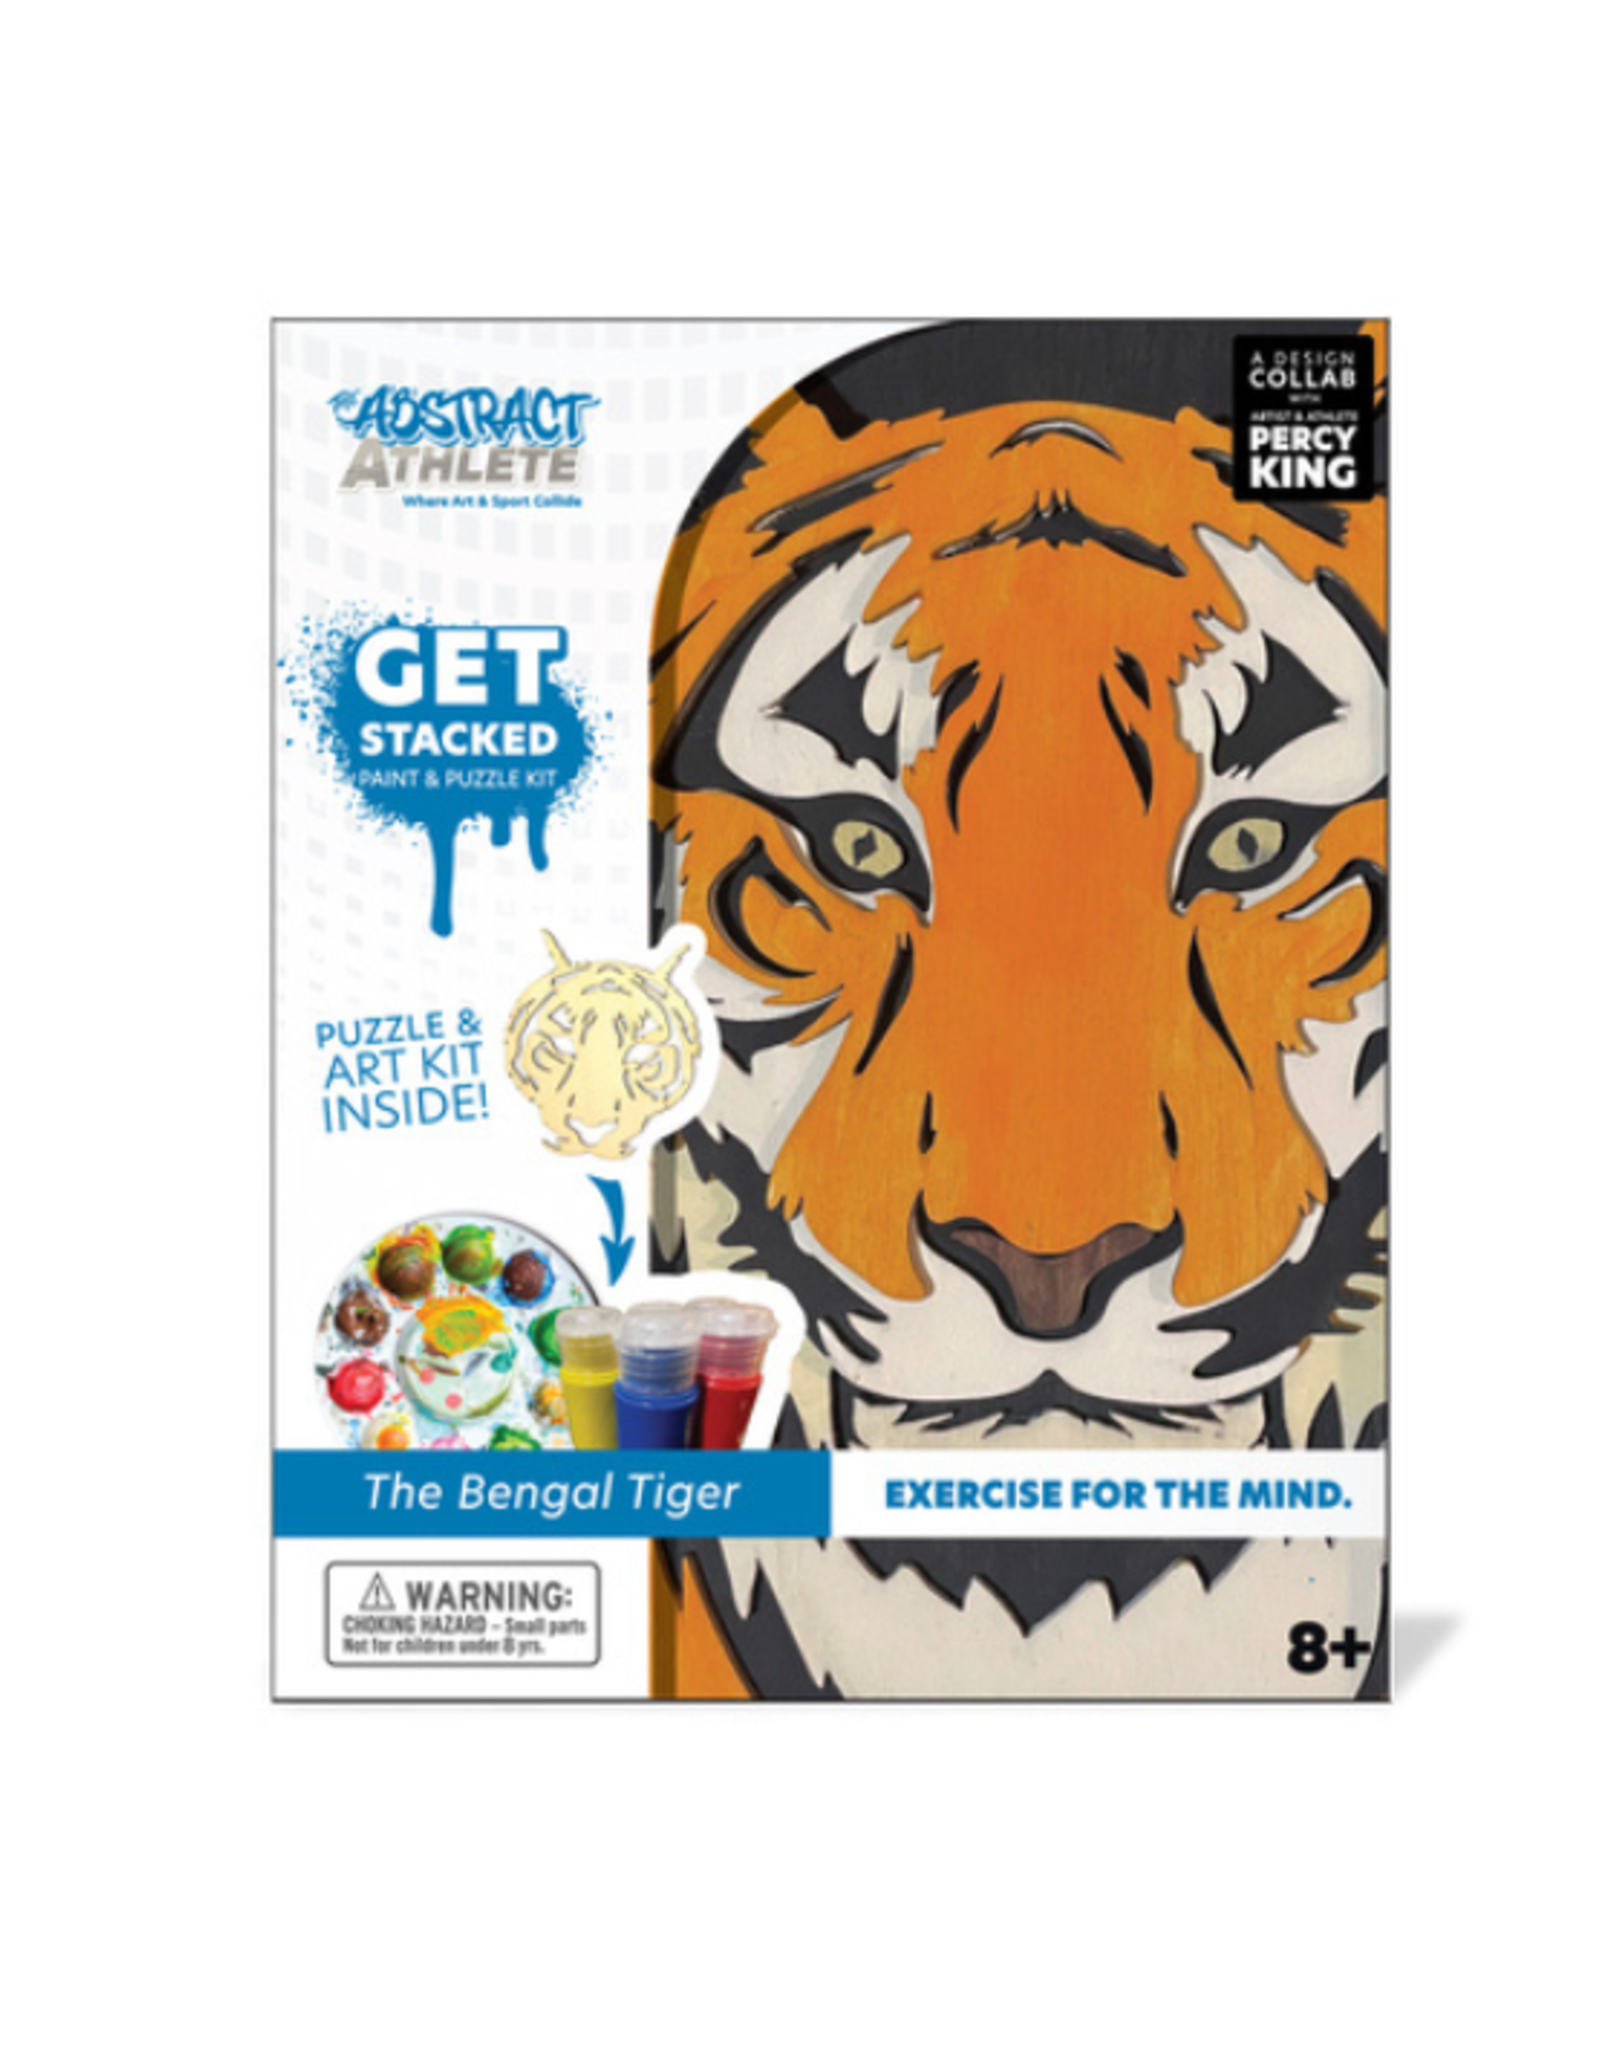 The Abstract Athlete The Abstract Athlete - Get Stacked Paint and Puzzle Kit Bengal Tiger